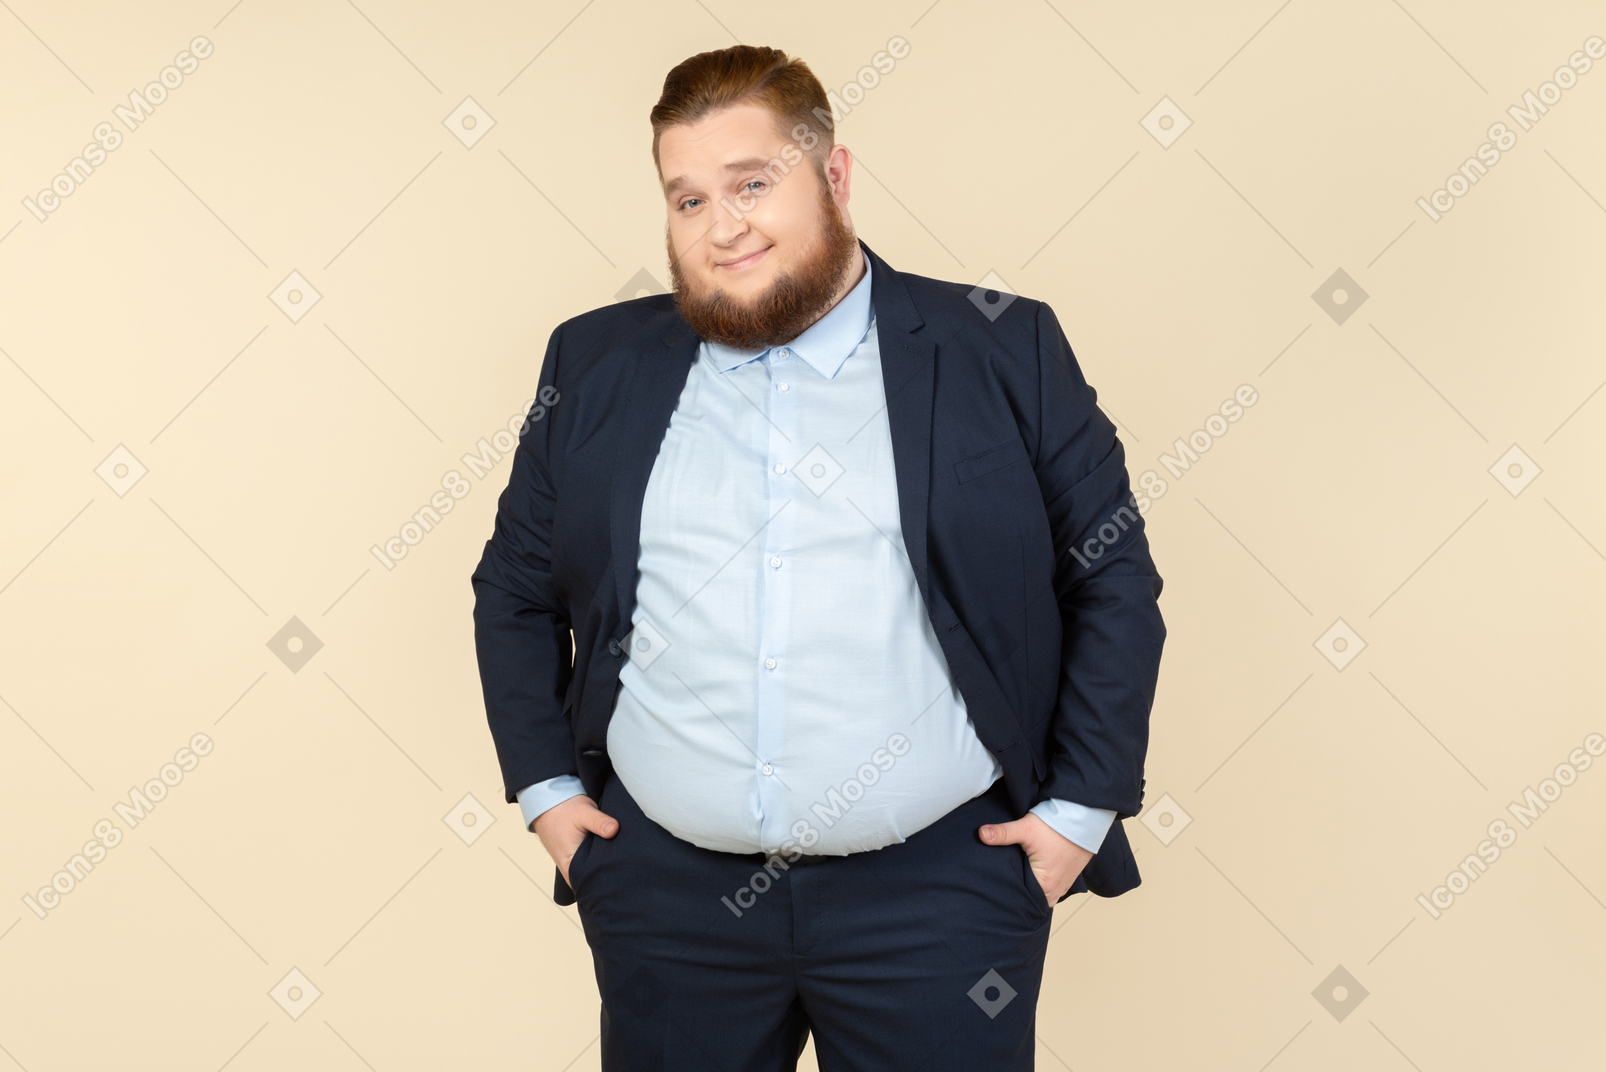 Positive looking young overweight man standing with hands in pockets